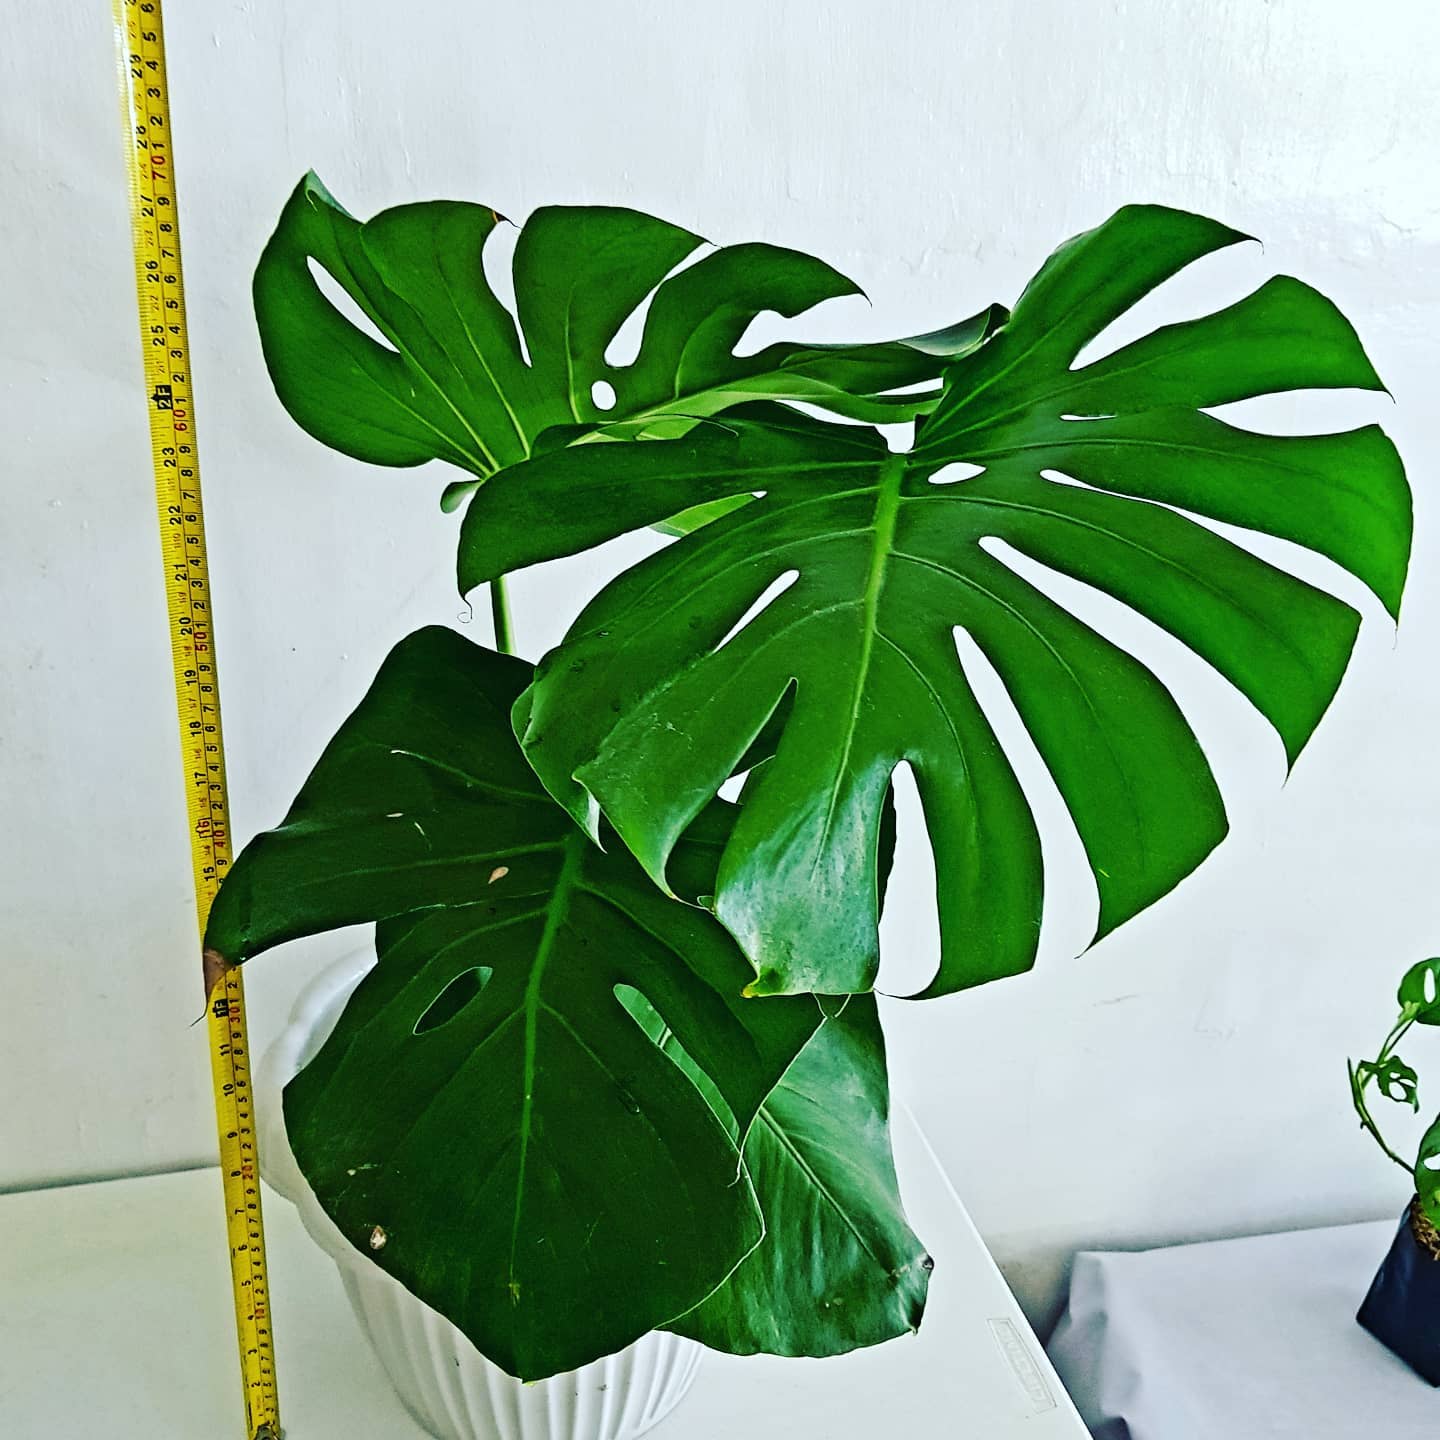 Top 20 Most Popular Types Of Monstera Pictorial Guide